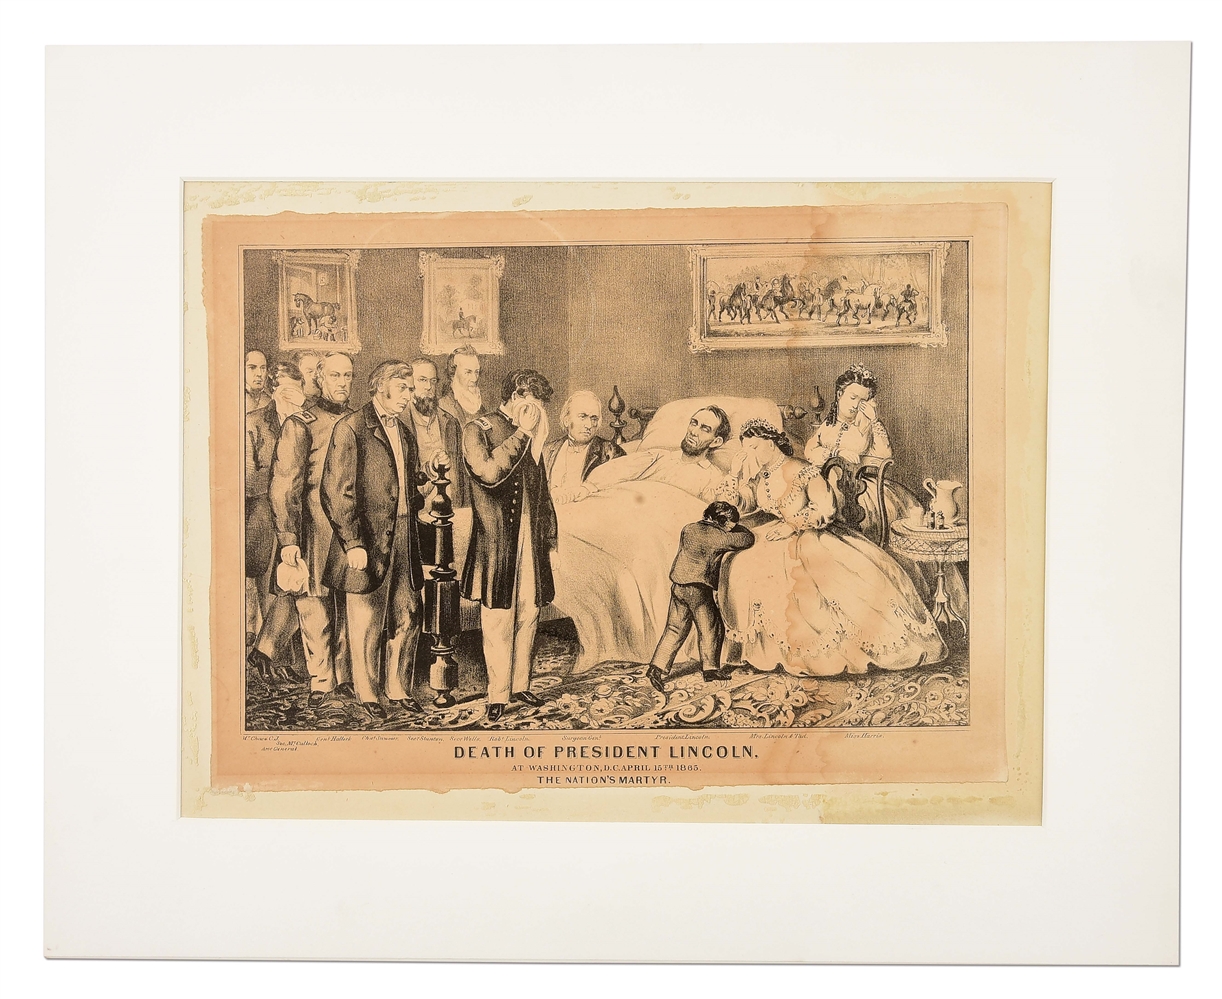 DEATH OF PRESIDENT LINCOLN, THE NATIONS MARTYR CURRIER & IVES PRINT.